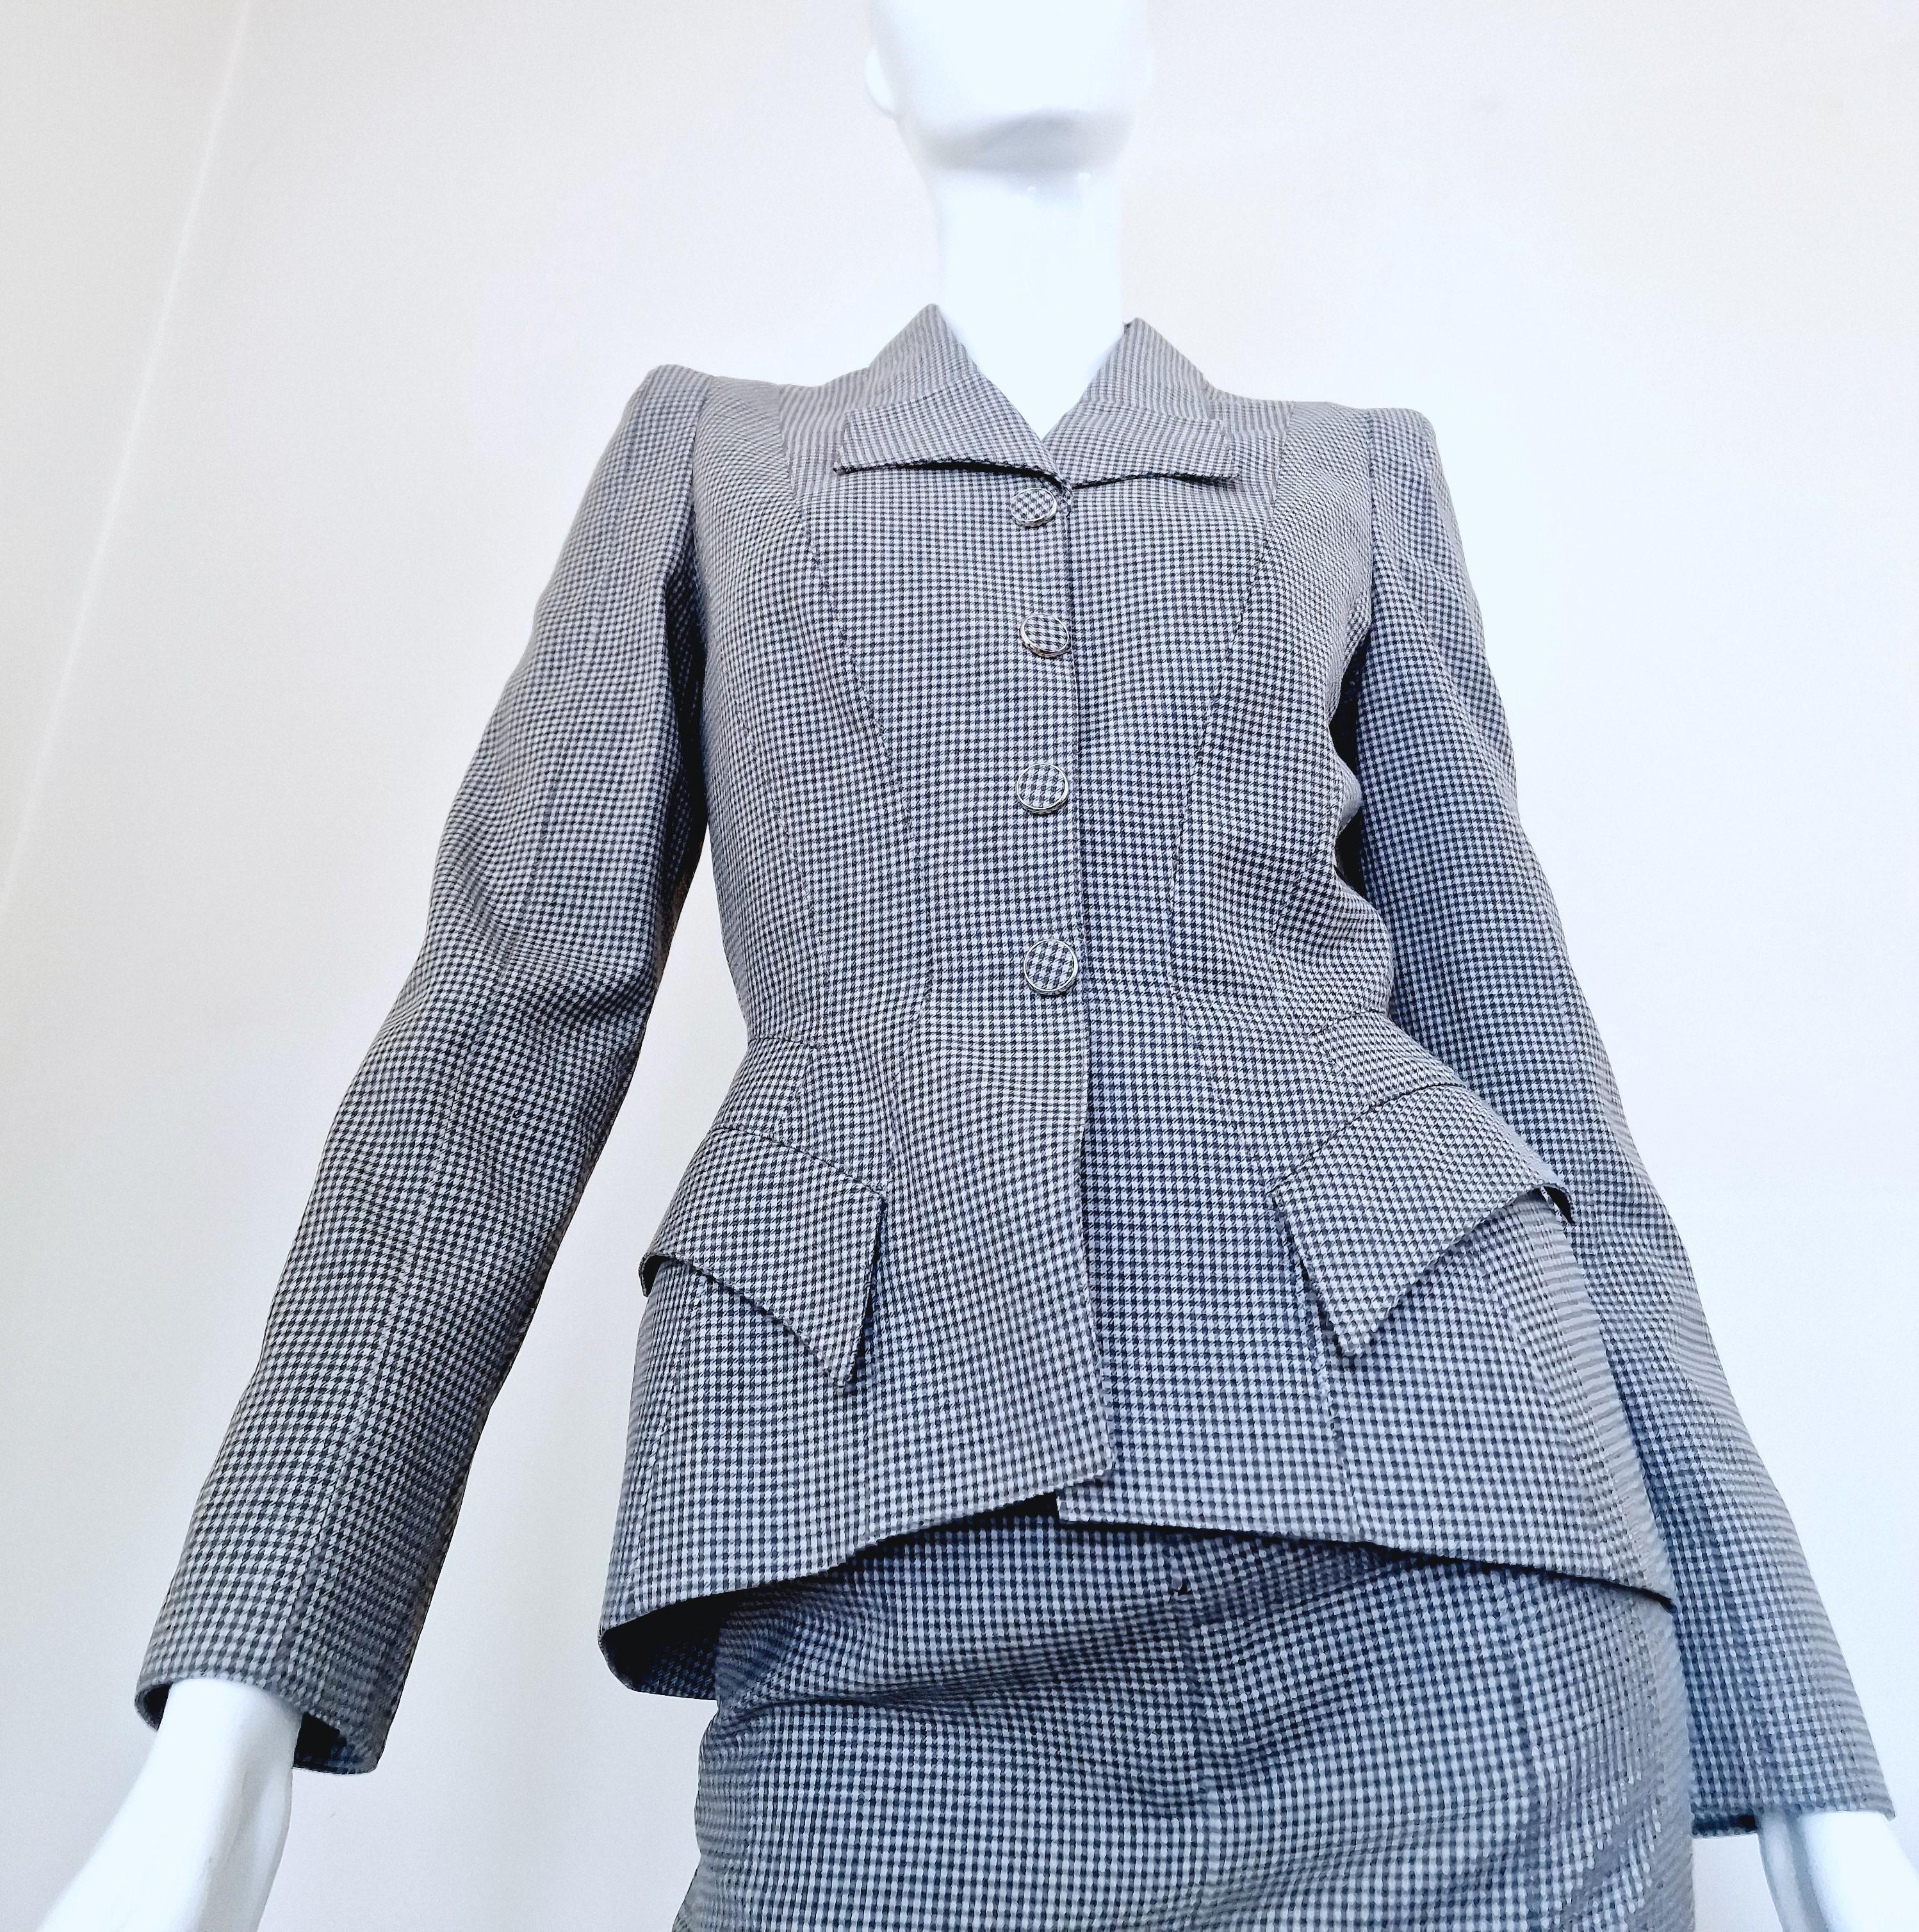 Houndstooth suit by Thierry Mugler!
With shoulder pads.
Wondeful silhouette! Wasp Waist, it emphasizes the waist.

EXCELLENT condition!

SIZE
X-small.
Marked size: FR36.

JACKET
Length: 59 cm / 23.2 inch
Bust: 41 cm / 16.1 inch
Waist: 31 cm / 12.2